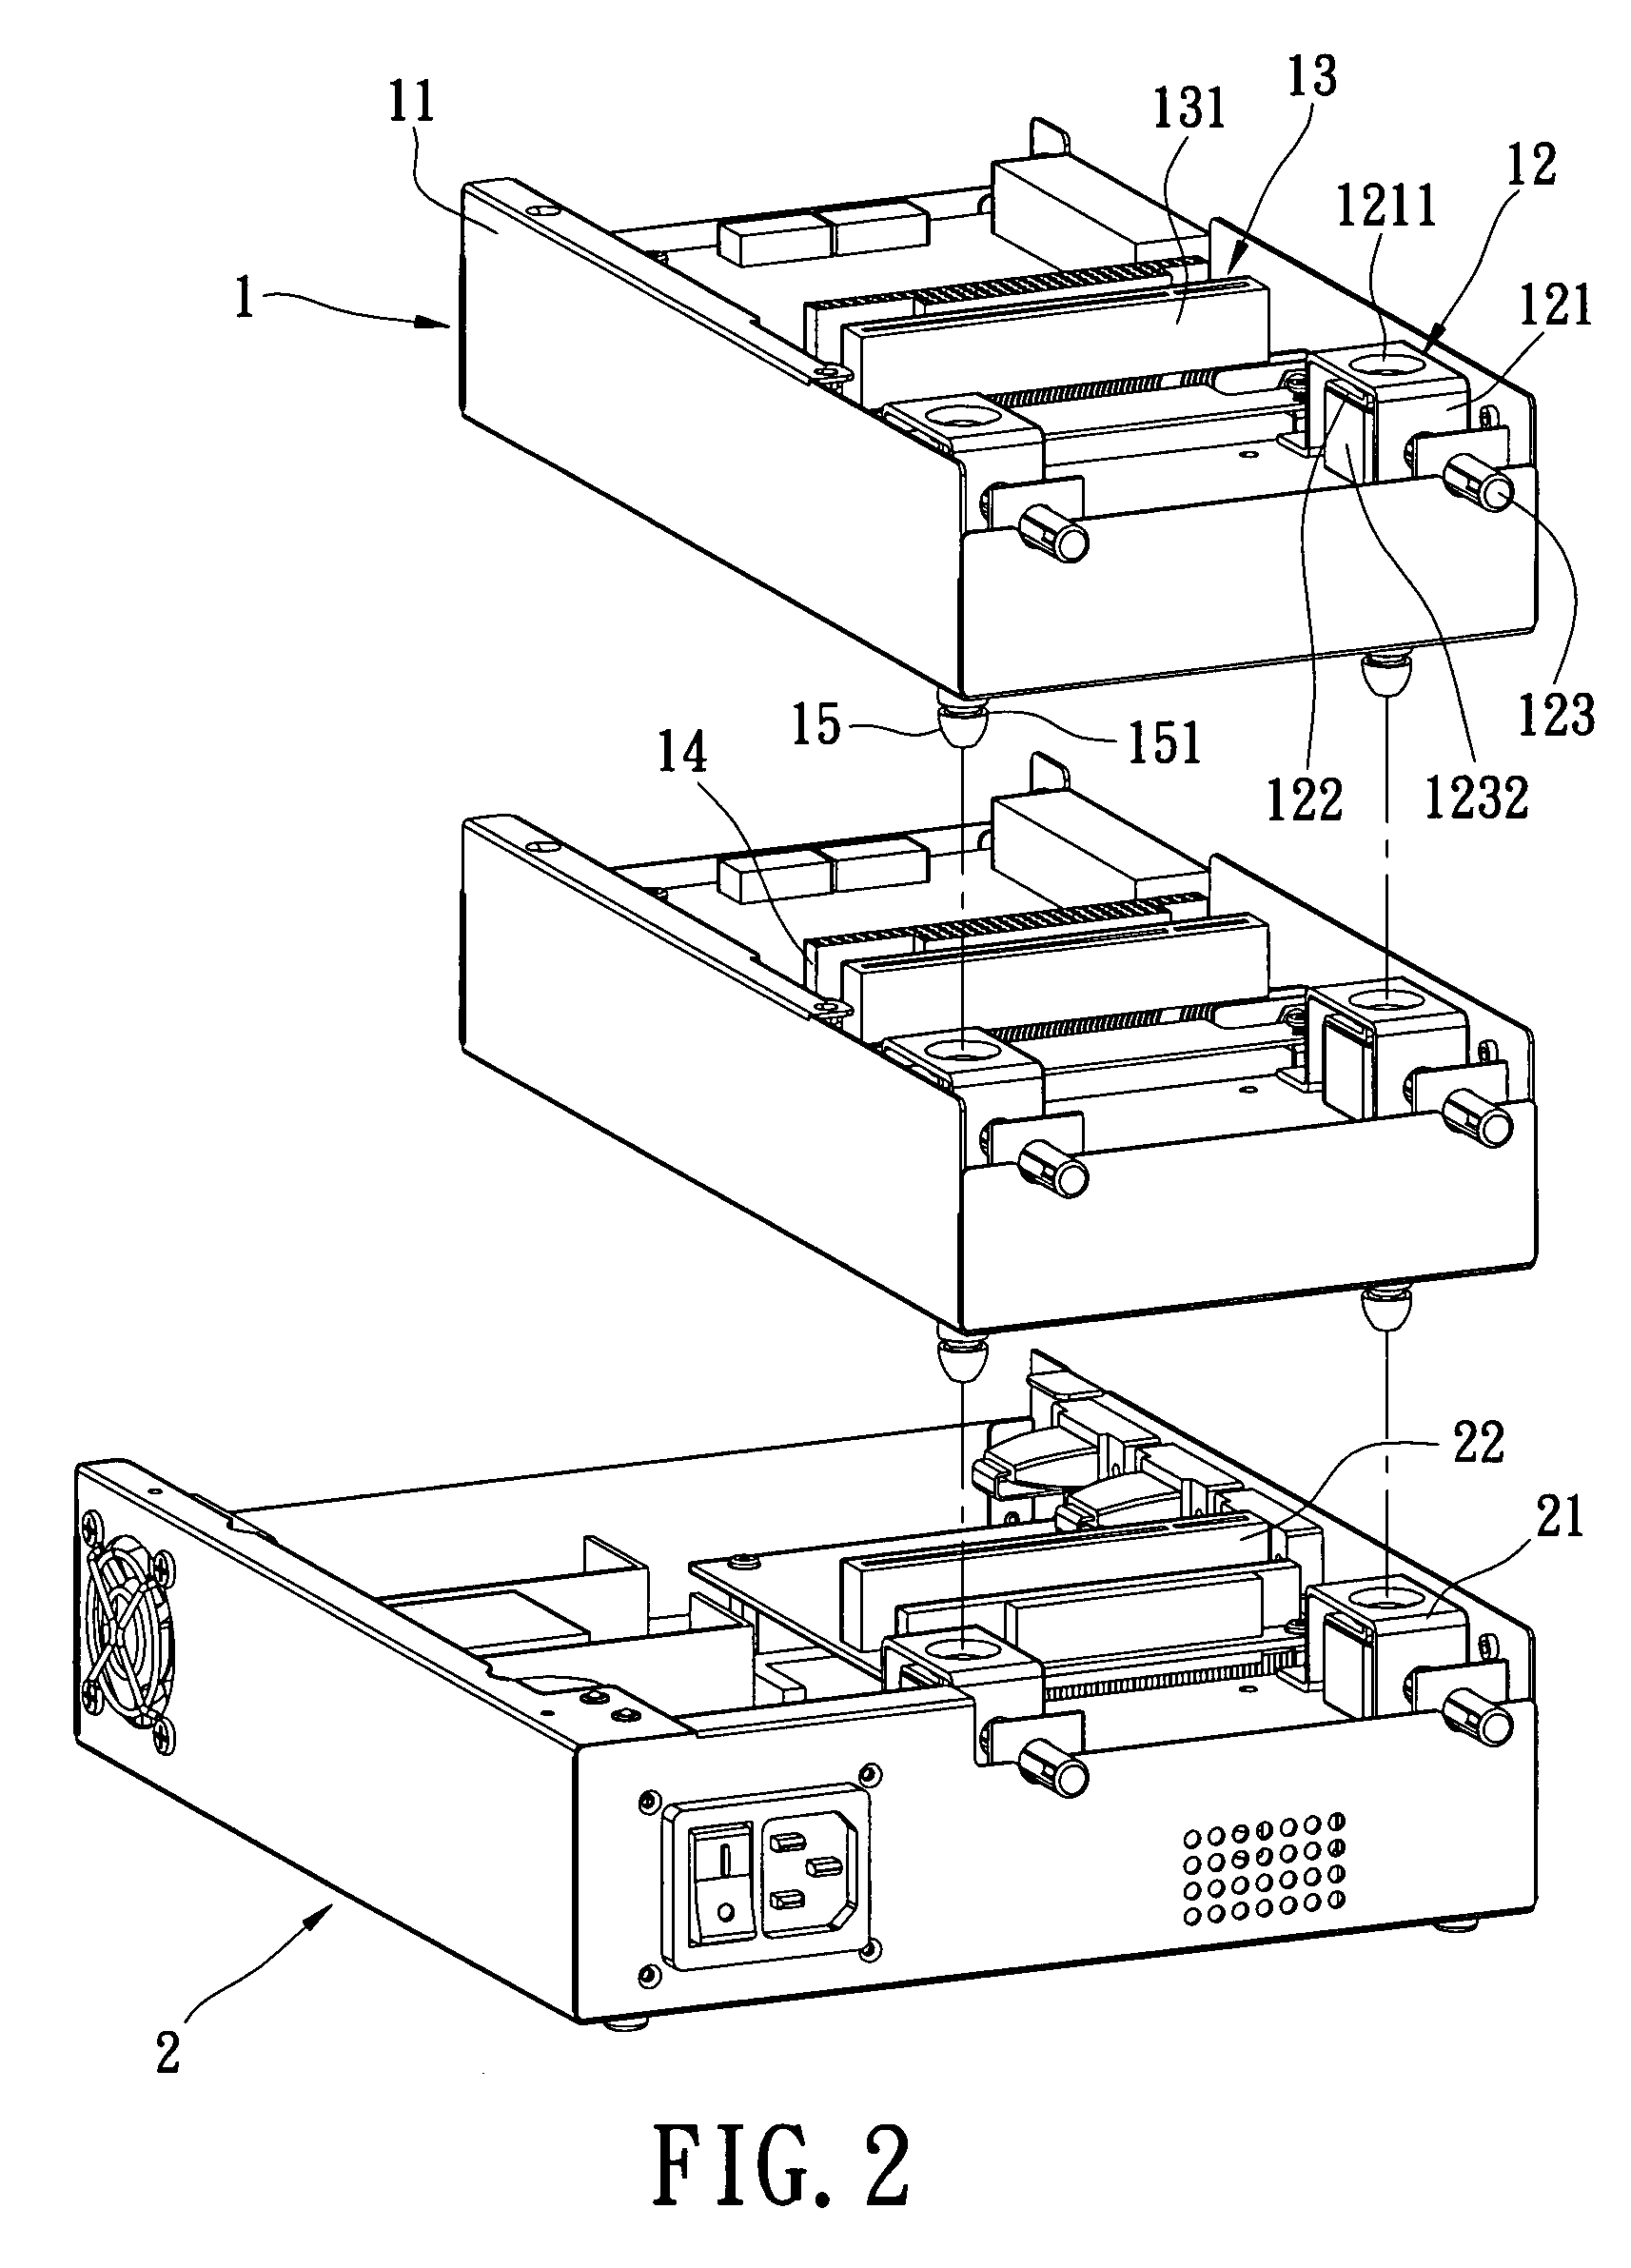 Expansion module and system thereof